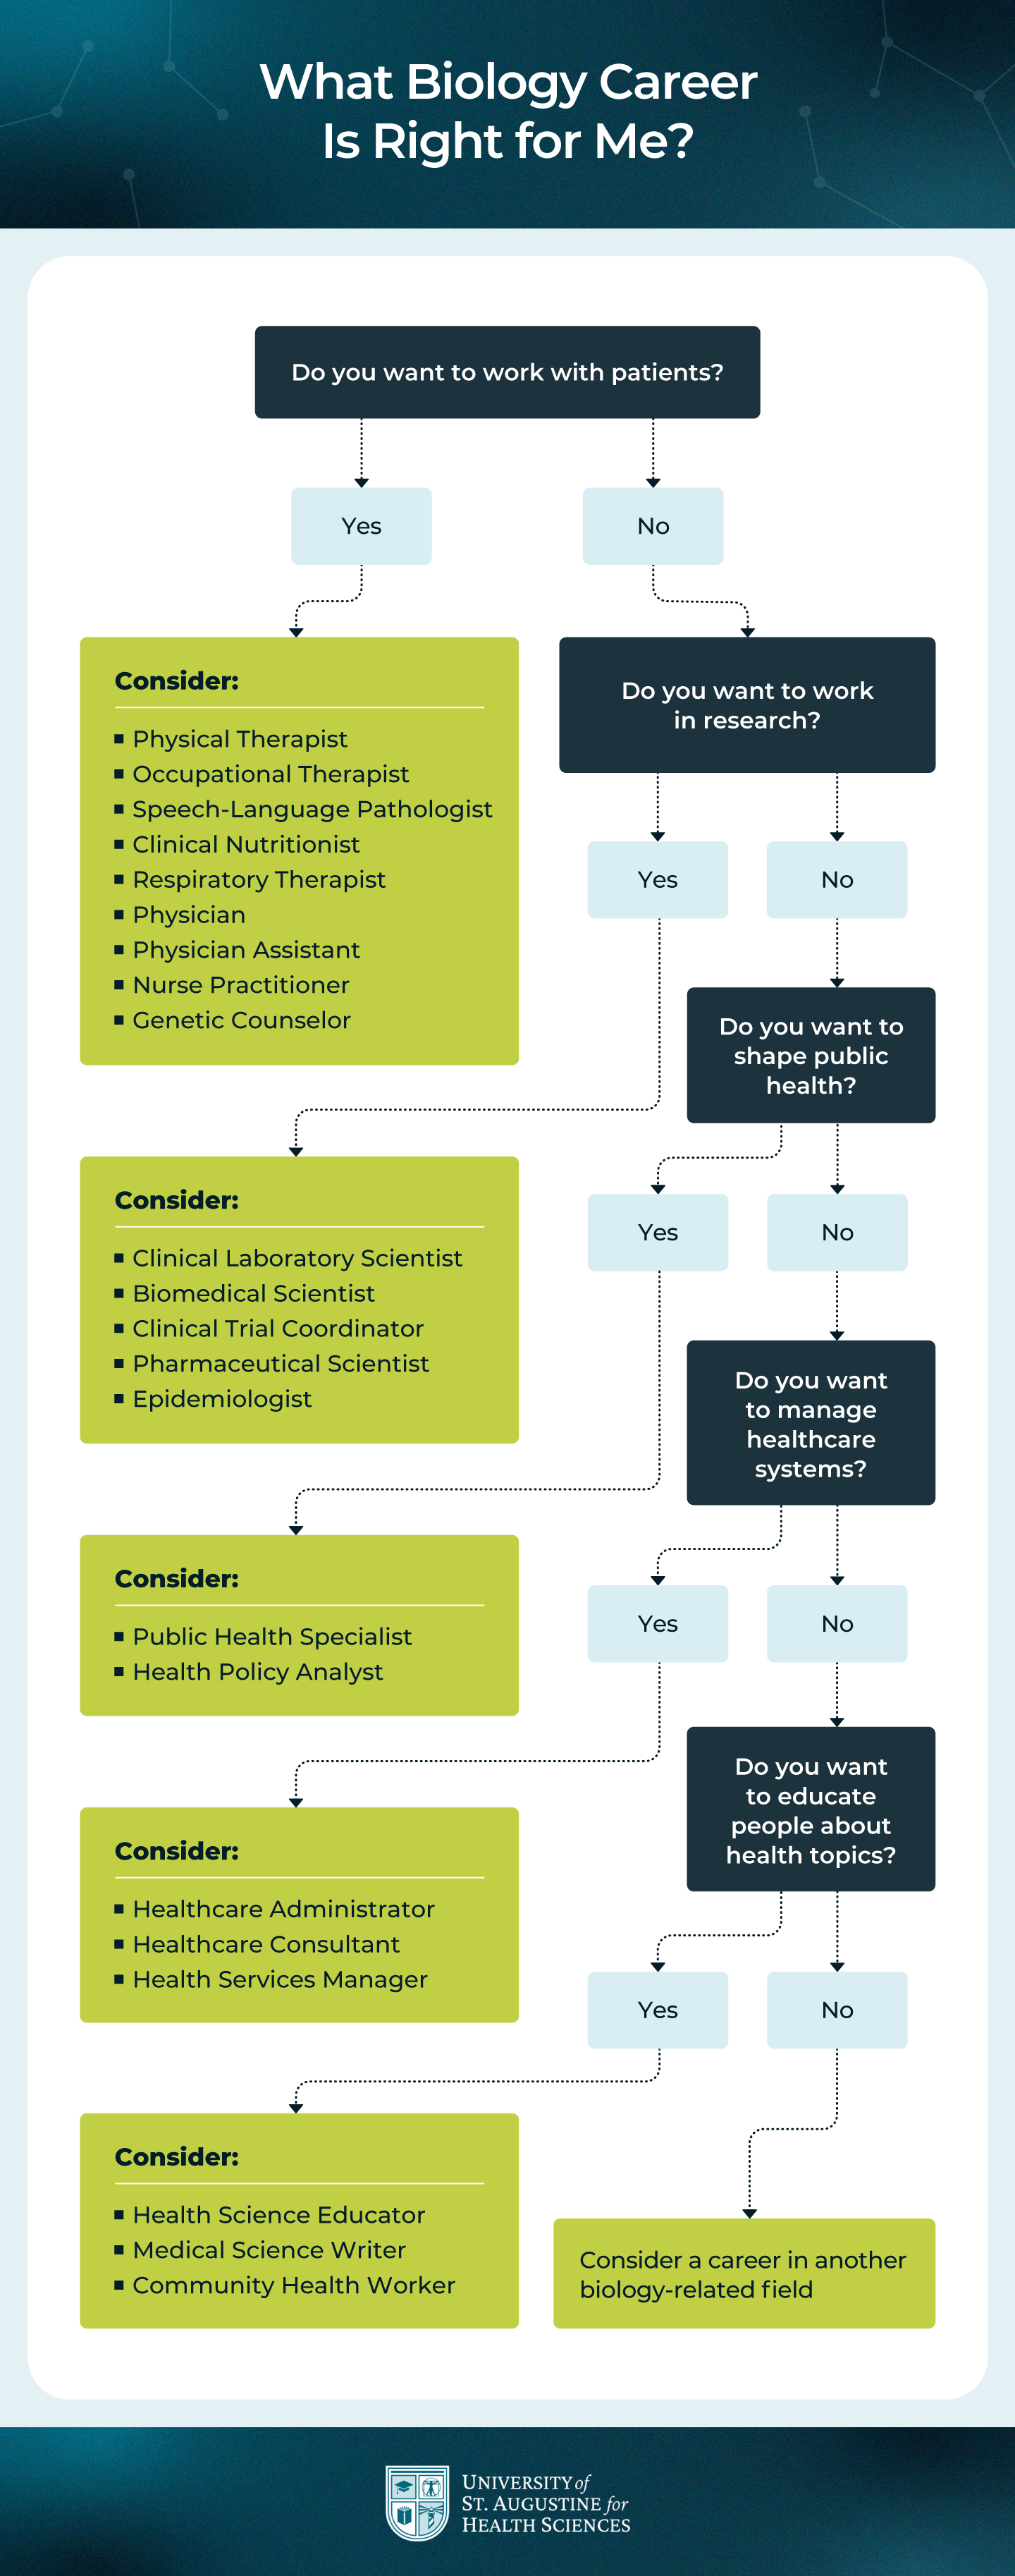 Flowchart to help you decide what biology career to pursue.